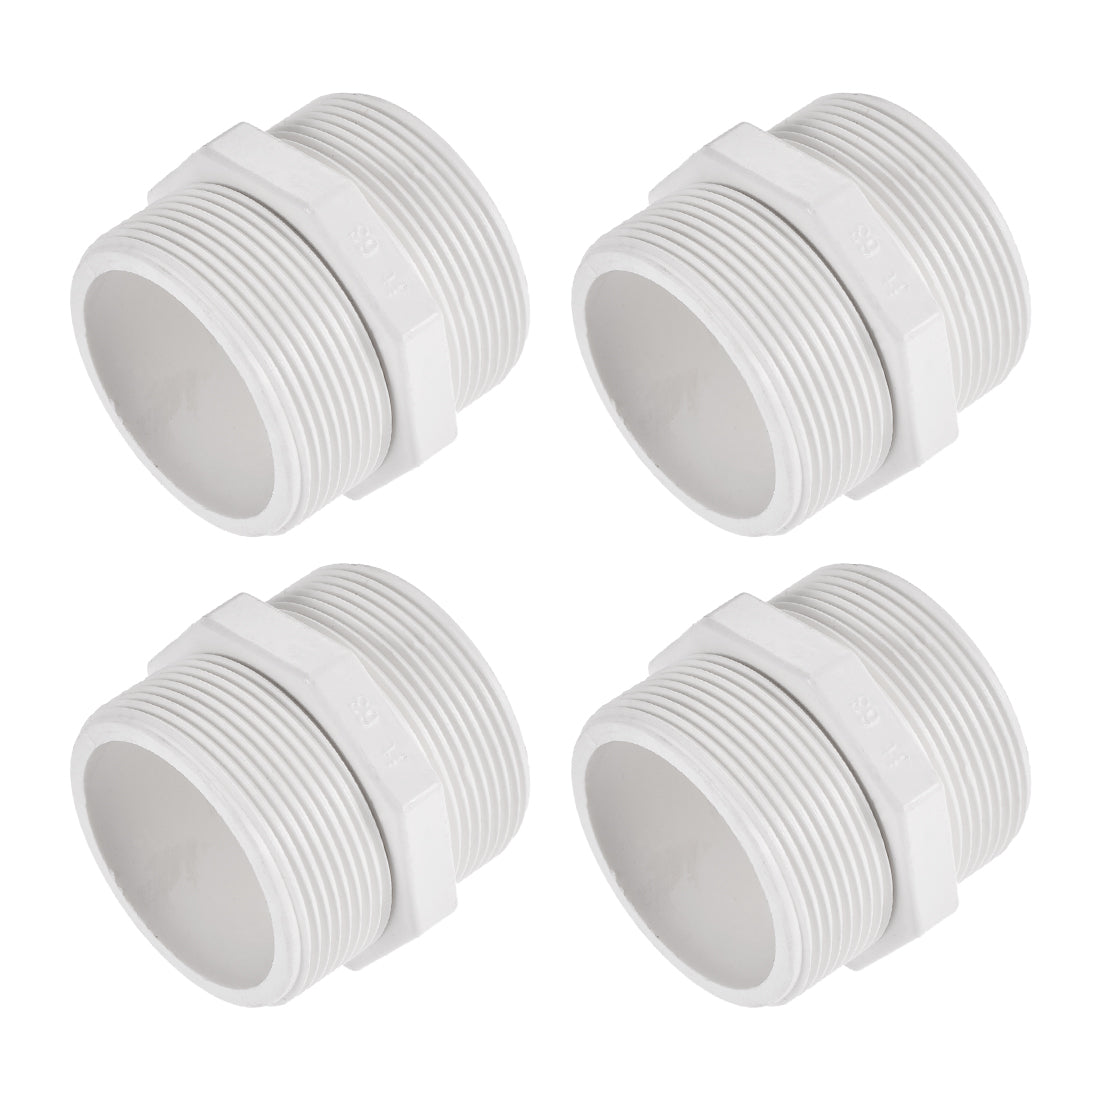 Uxcell Uxcell Pipe Fitting, G2 Male Thread, Hex Nipple Tube Adaptor Hose Connector, for Water Tanks, PVC, White, Pack of 4